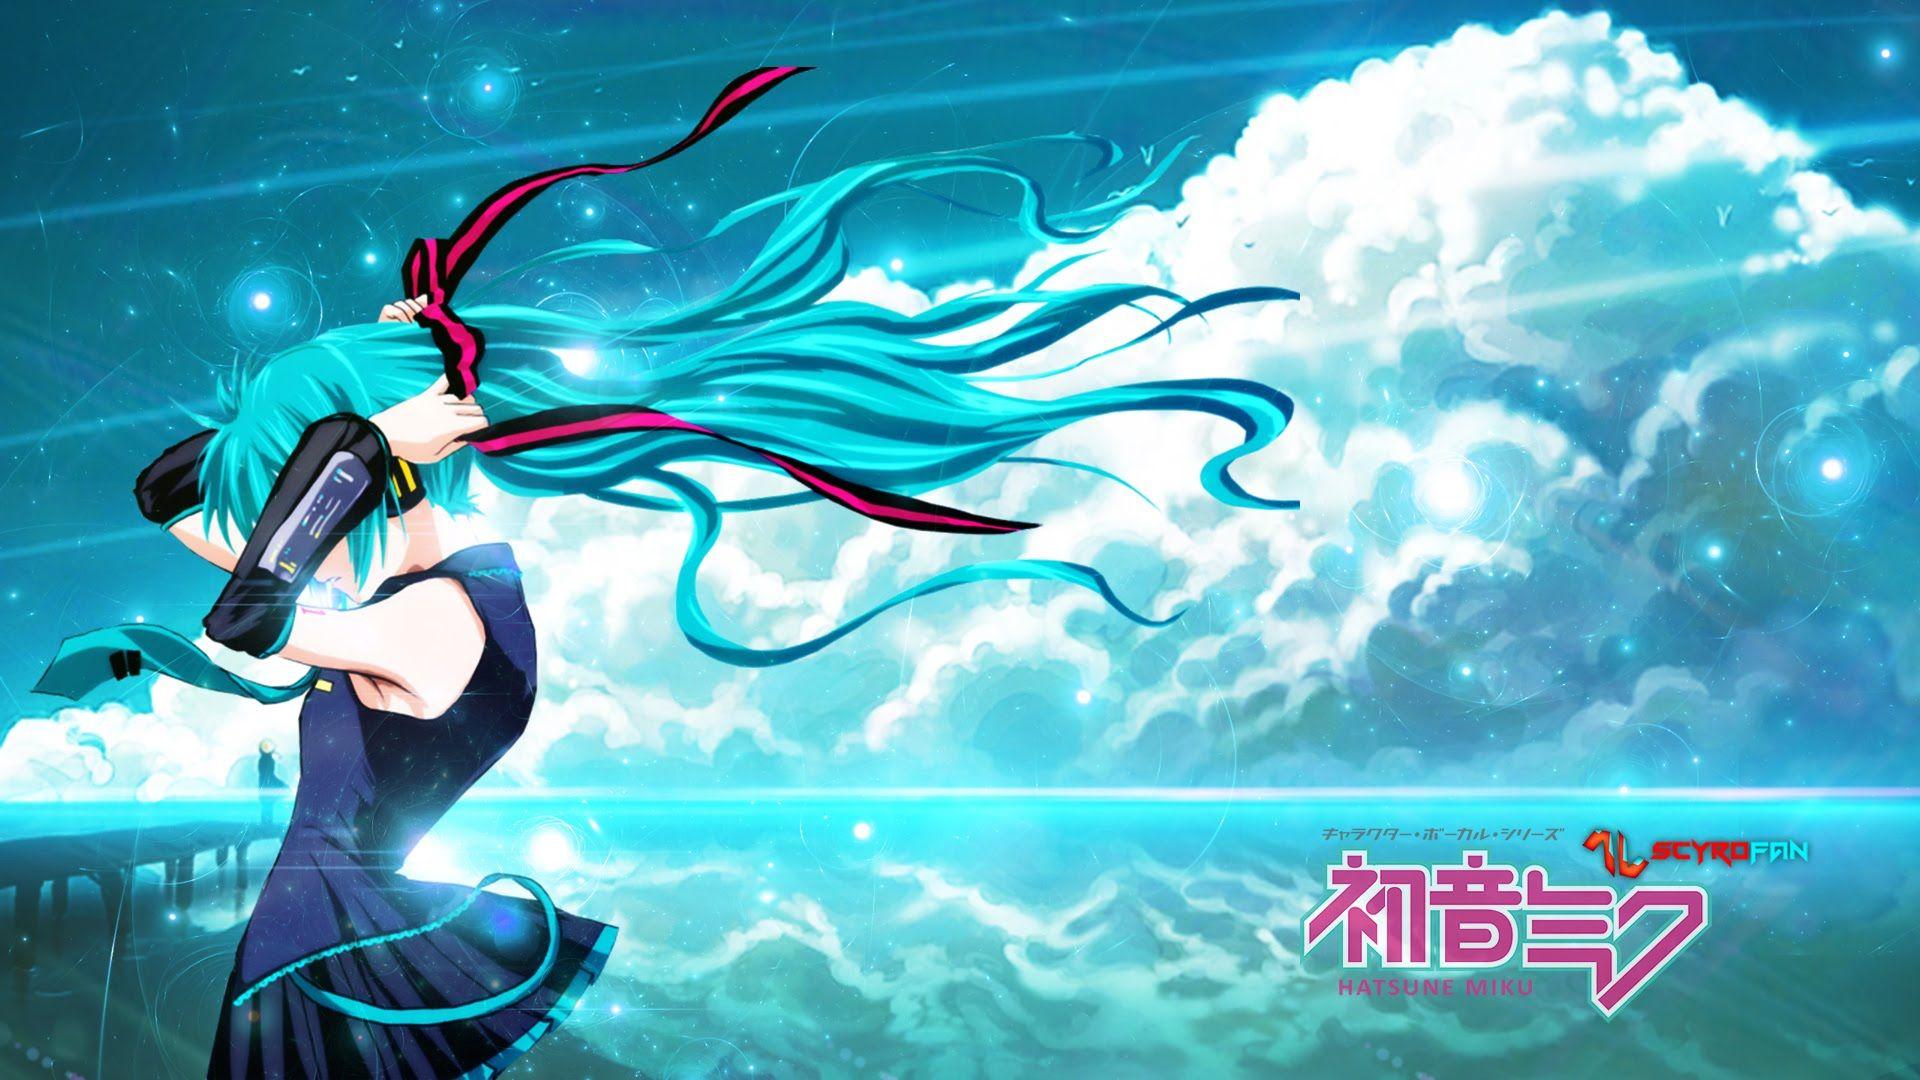 On Wallpaper and Picture: Hatsune Miku